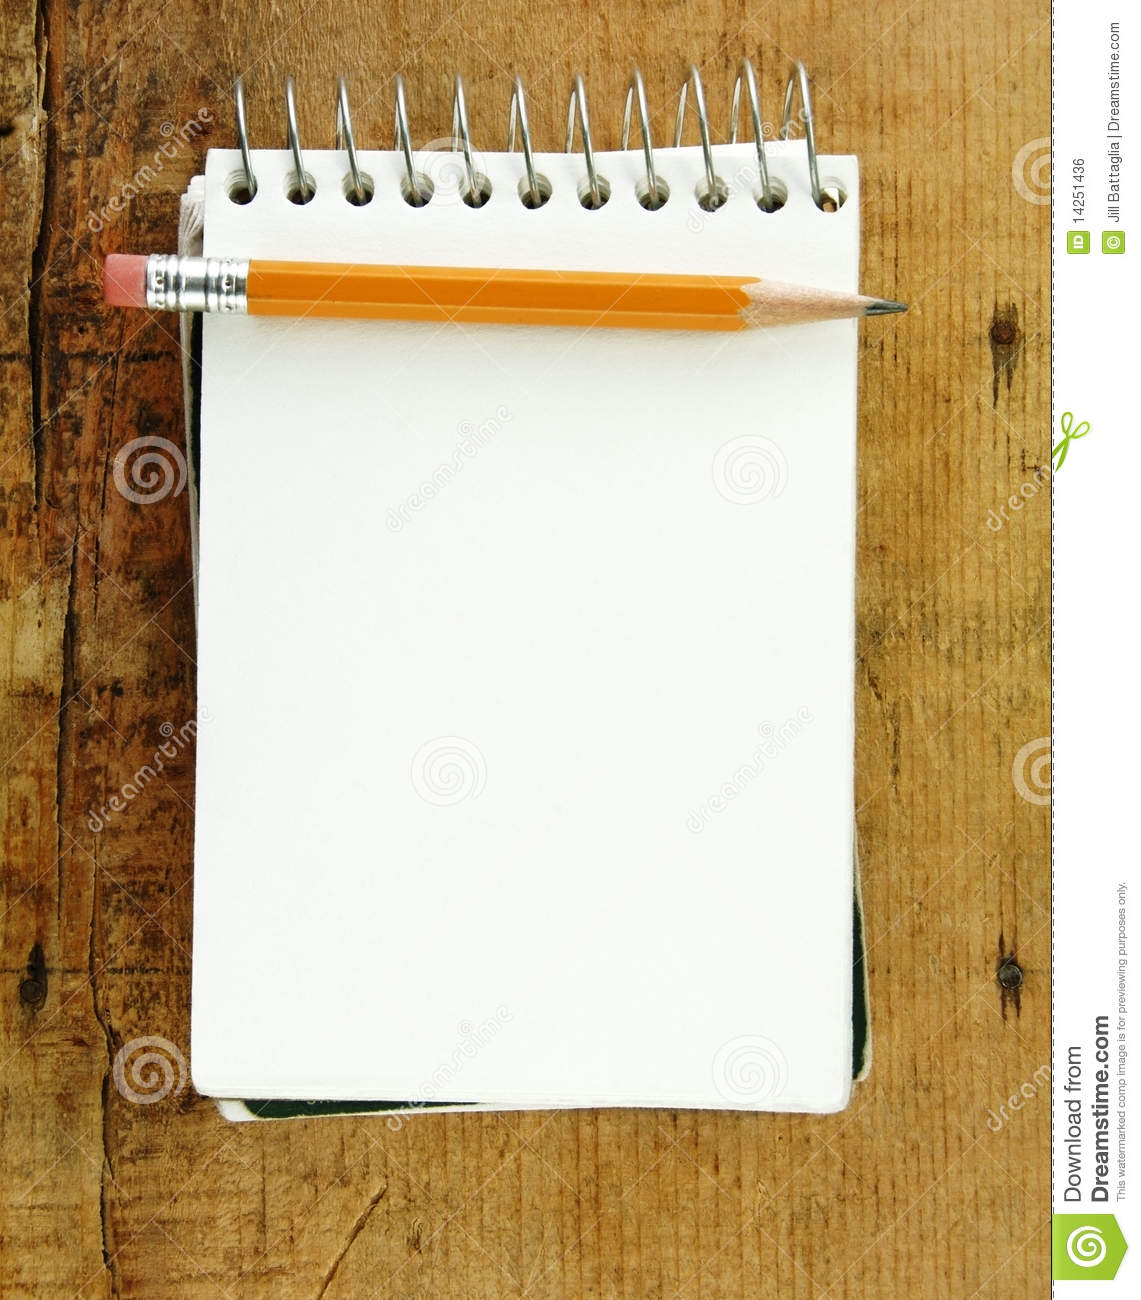 Pencil On Small Pad Of Paper Royalty Free Stock Image   Image